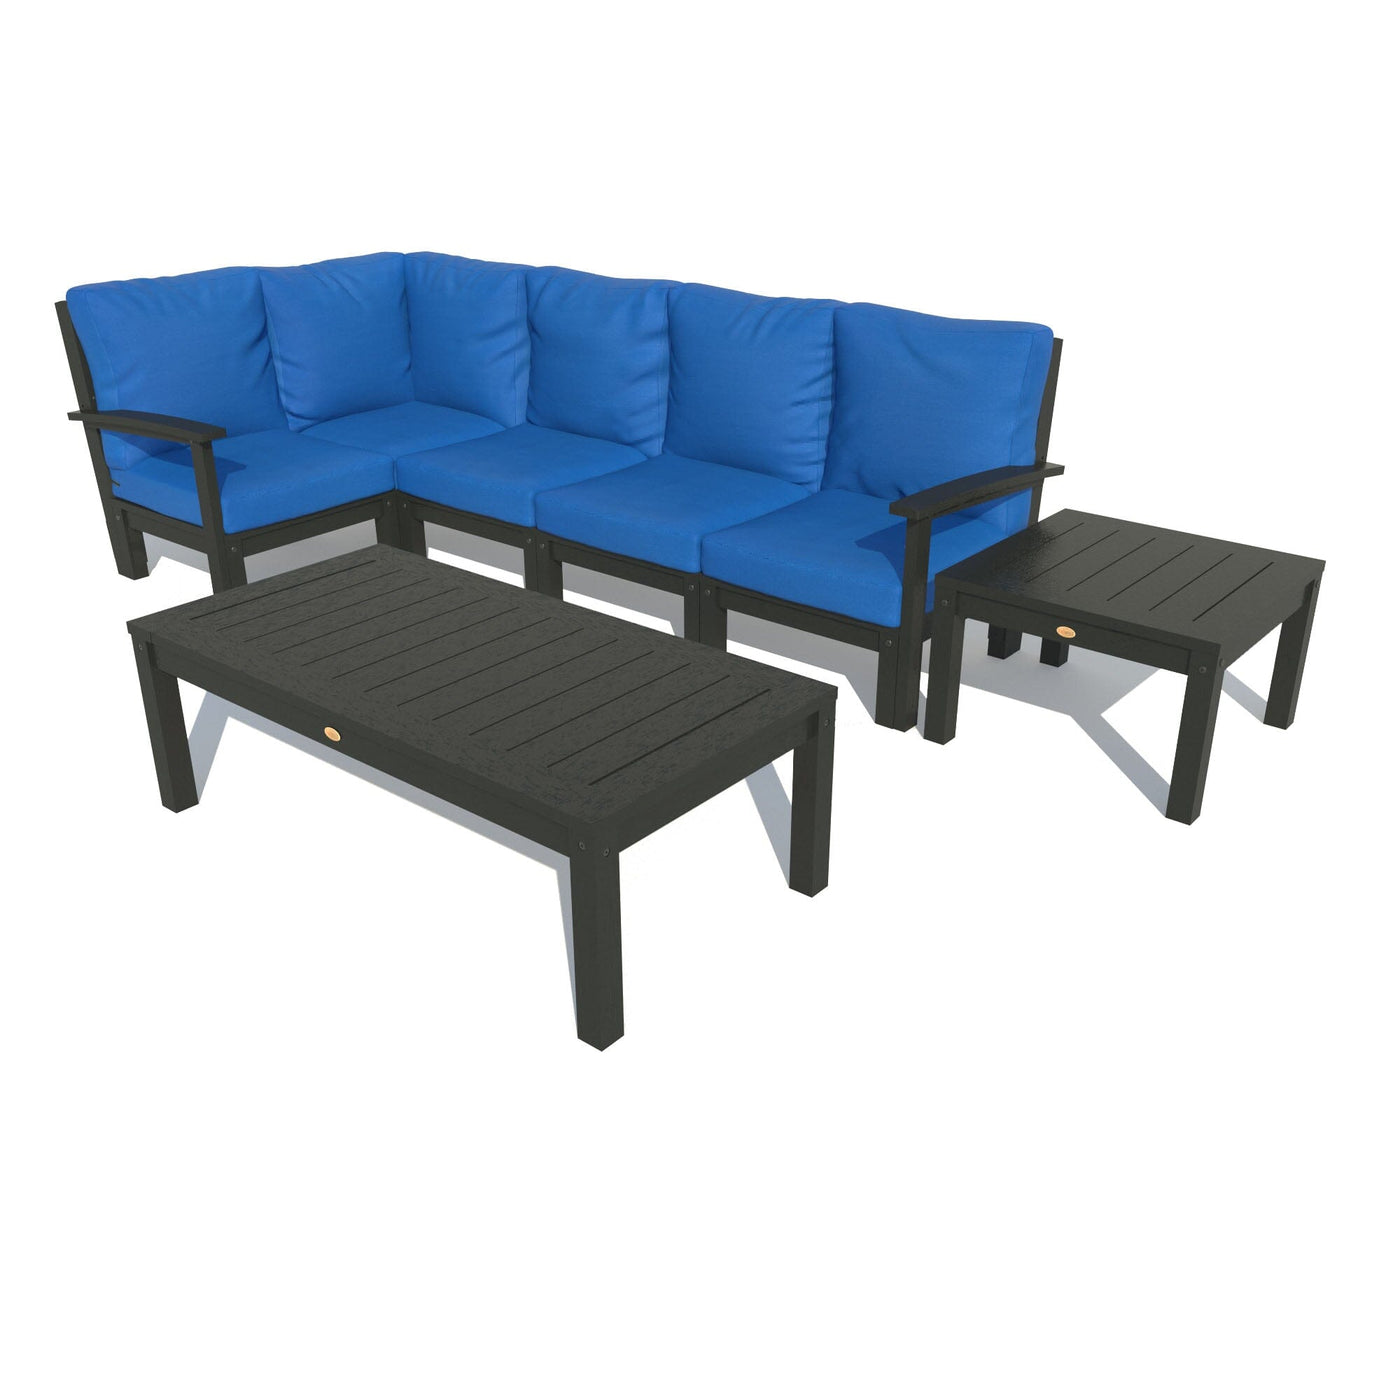 Bespoke Deep Seating: 7 Piece Sectional Set with Conversation and Side Table Deep Seating Highwood USA Cobalt Blue Black 